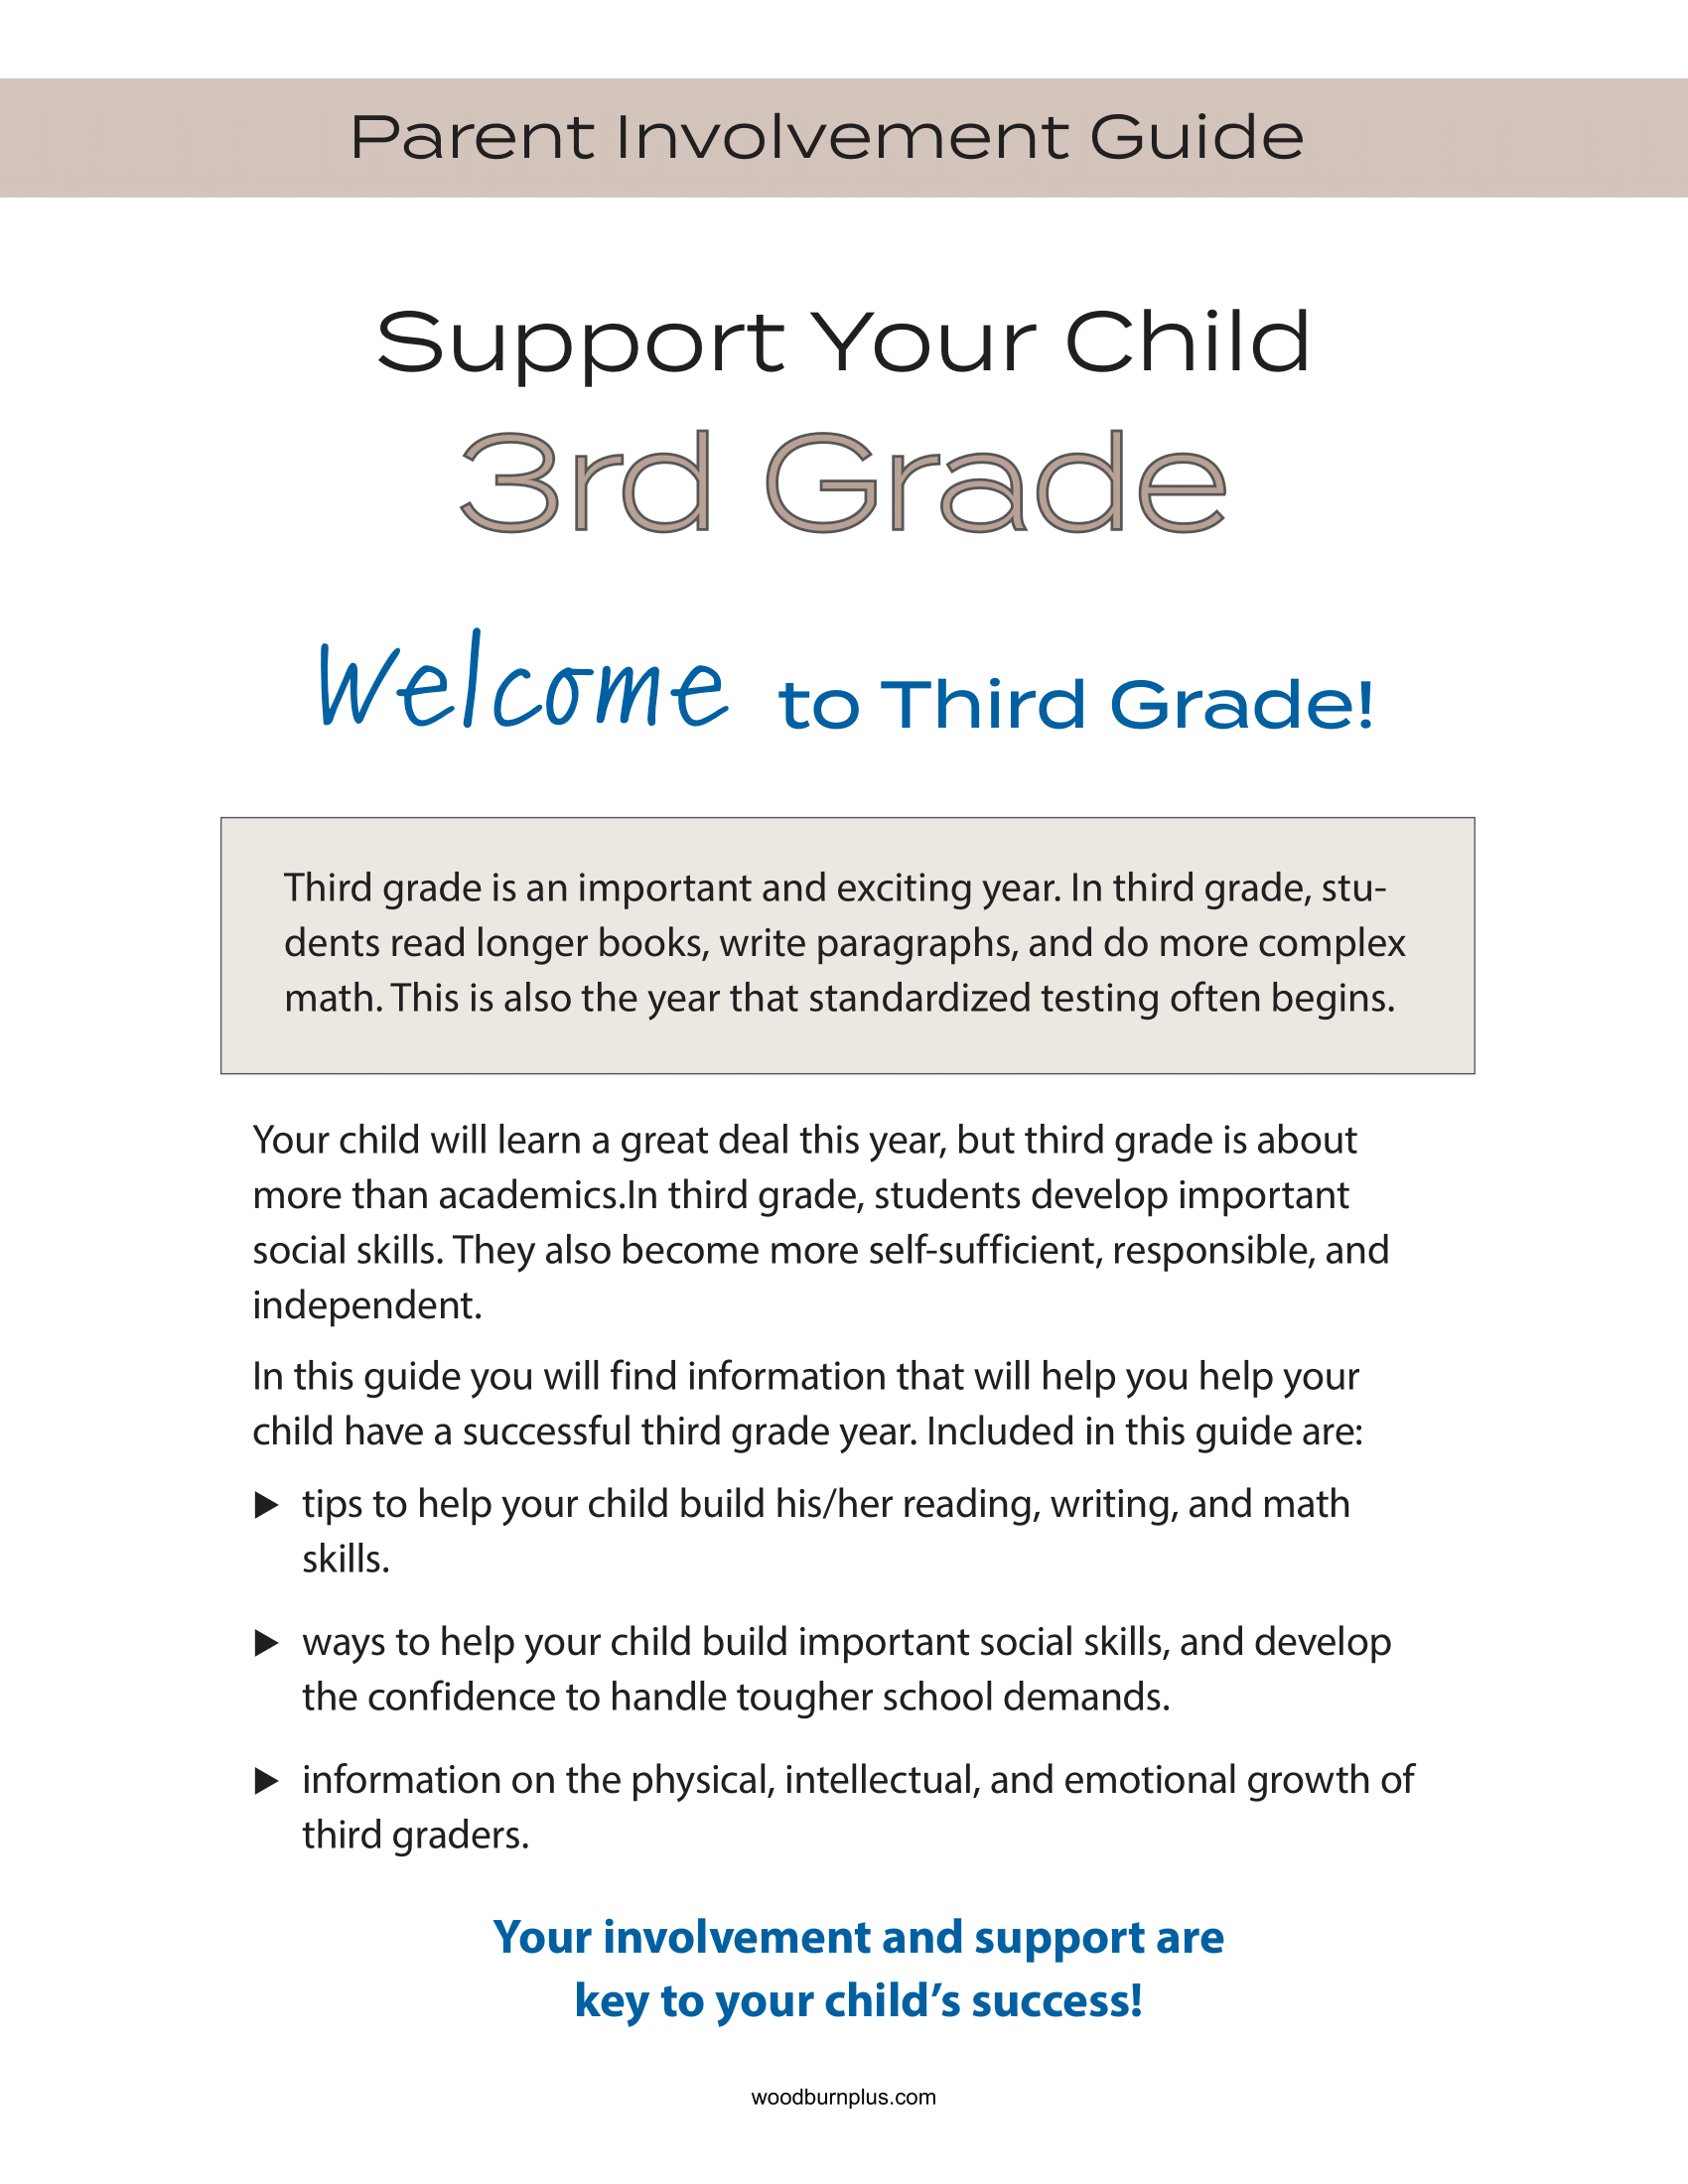 Support Your Child - 3rd Grade